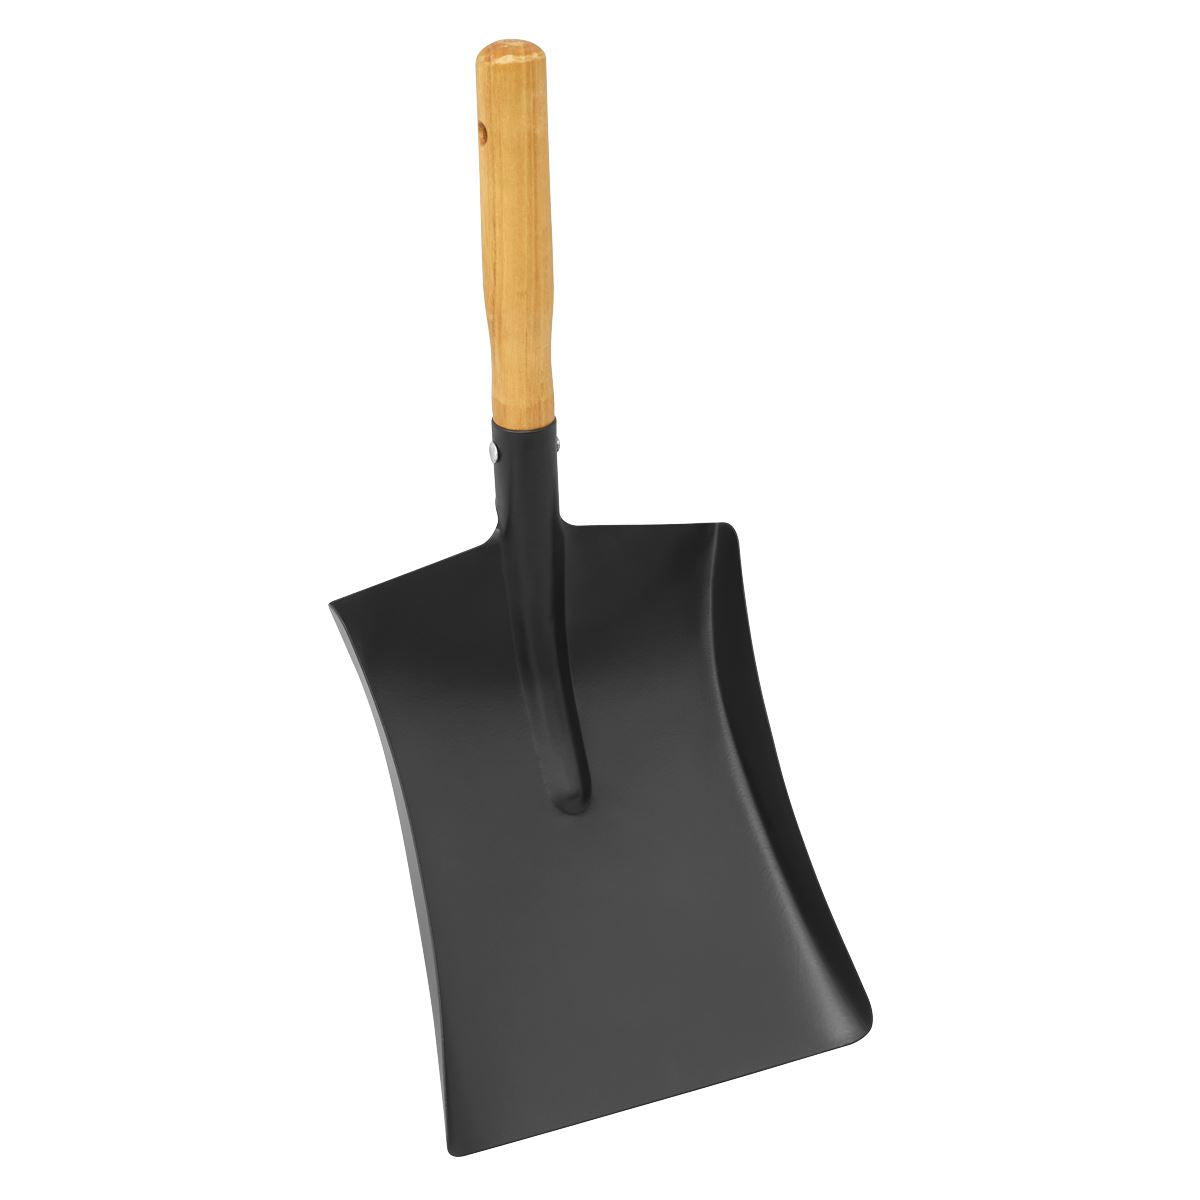 Sealey Coal shovel 8" with 228mm Wooden Handle